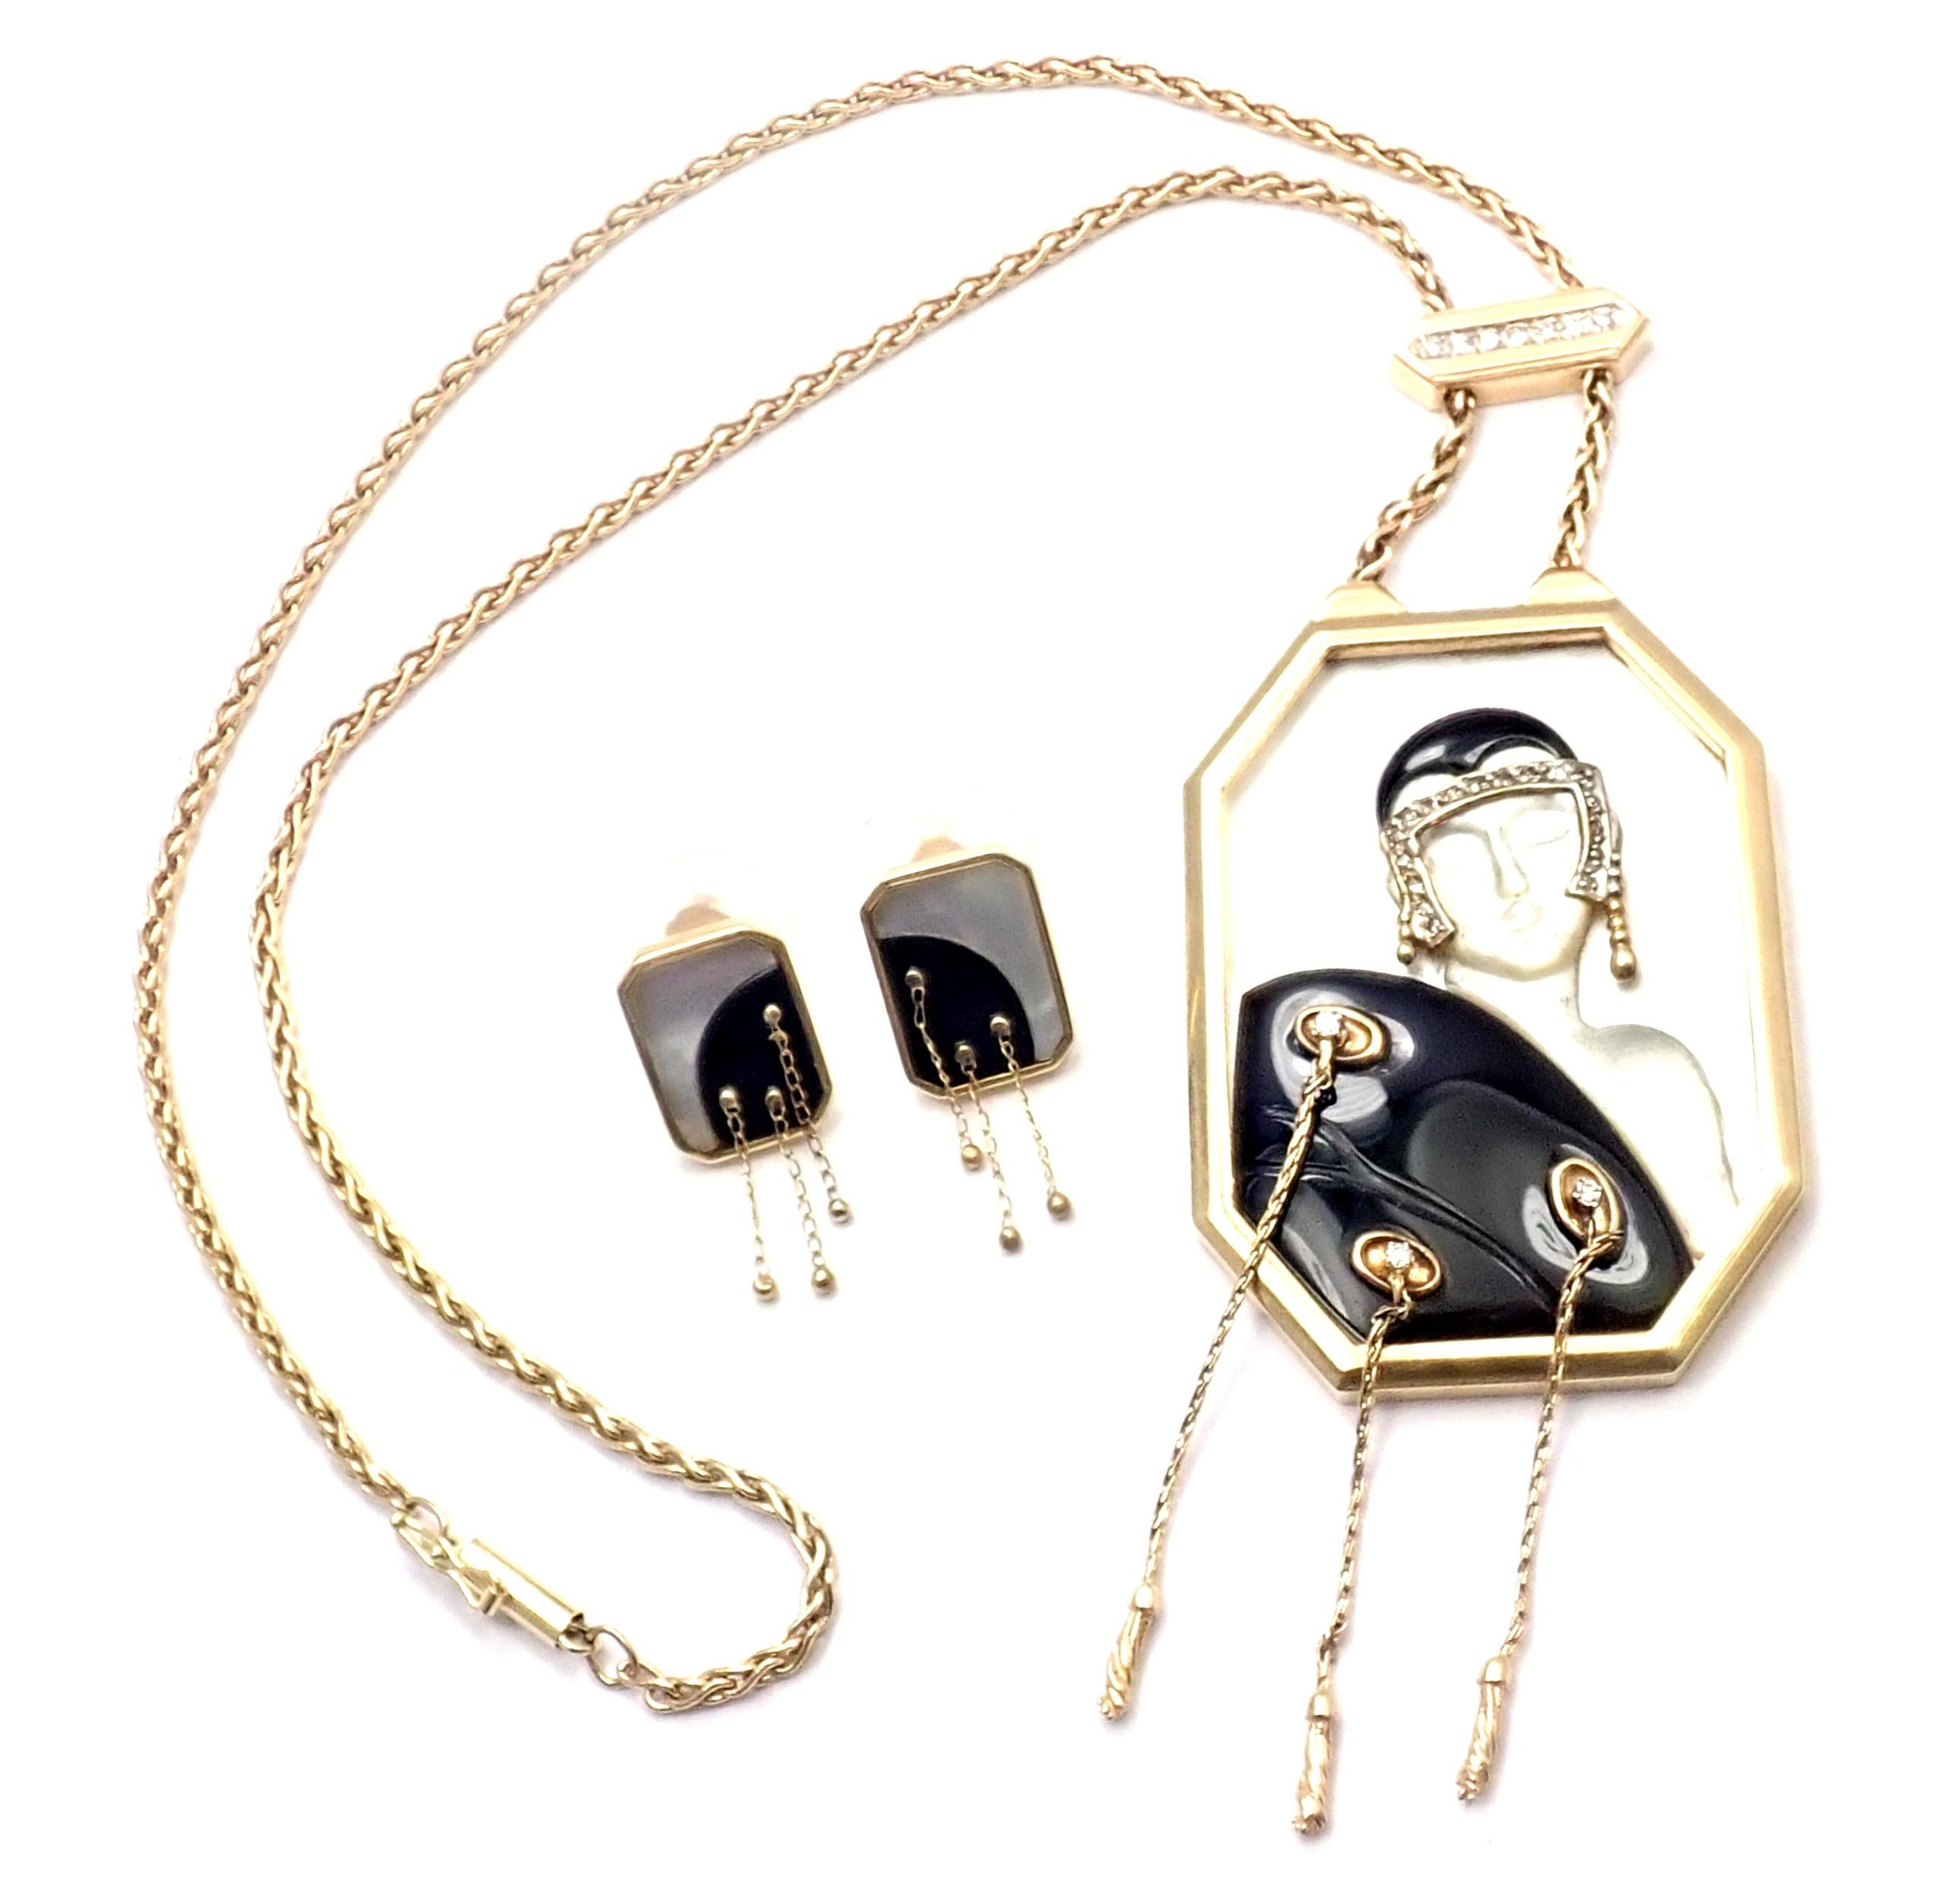 14k yellow gold, diamond, mother of pearl, black onyx, necklace and earrings set from Erte titled 